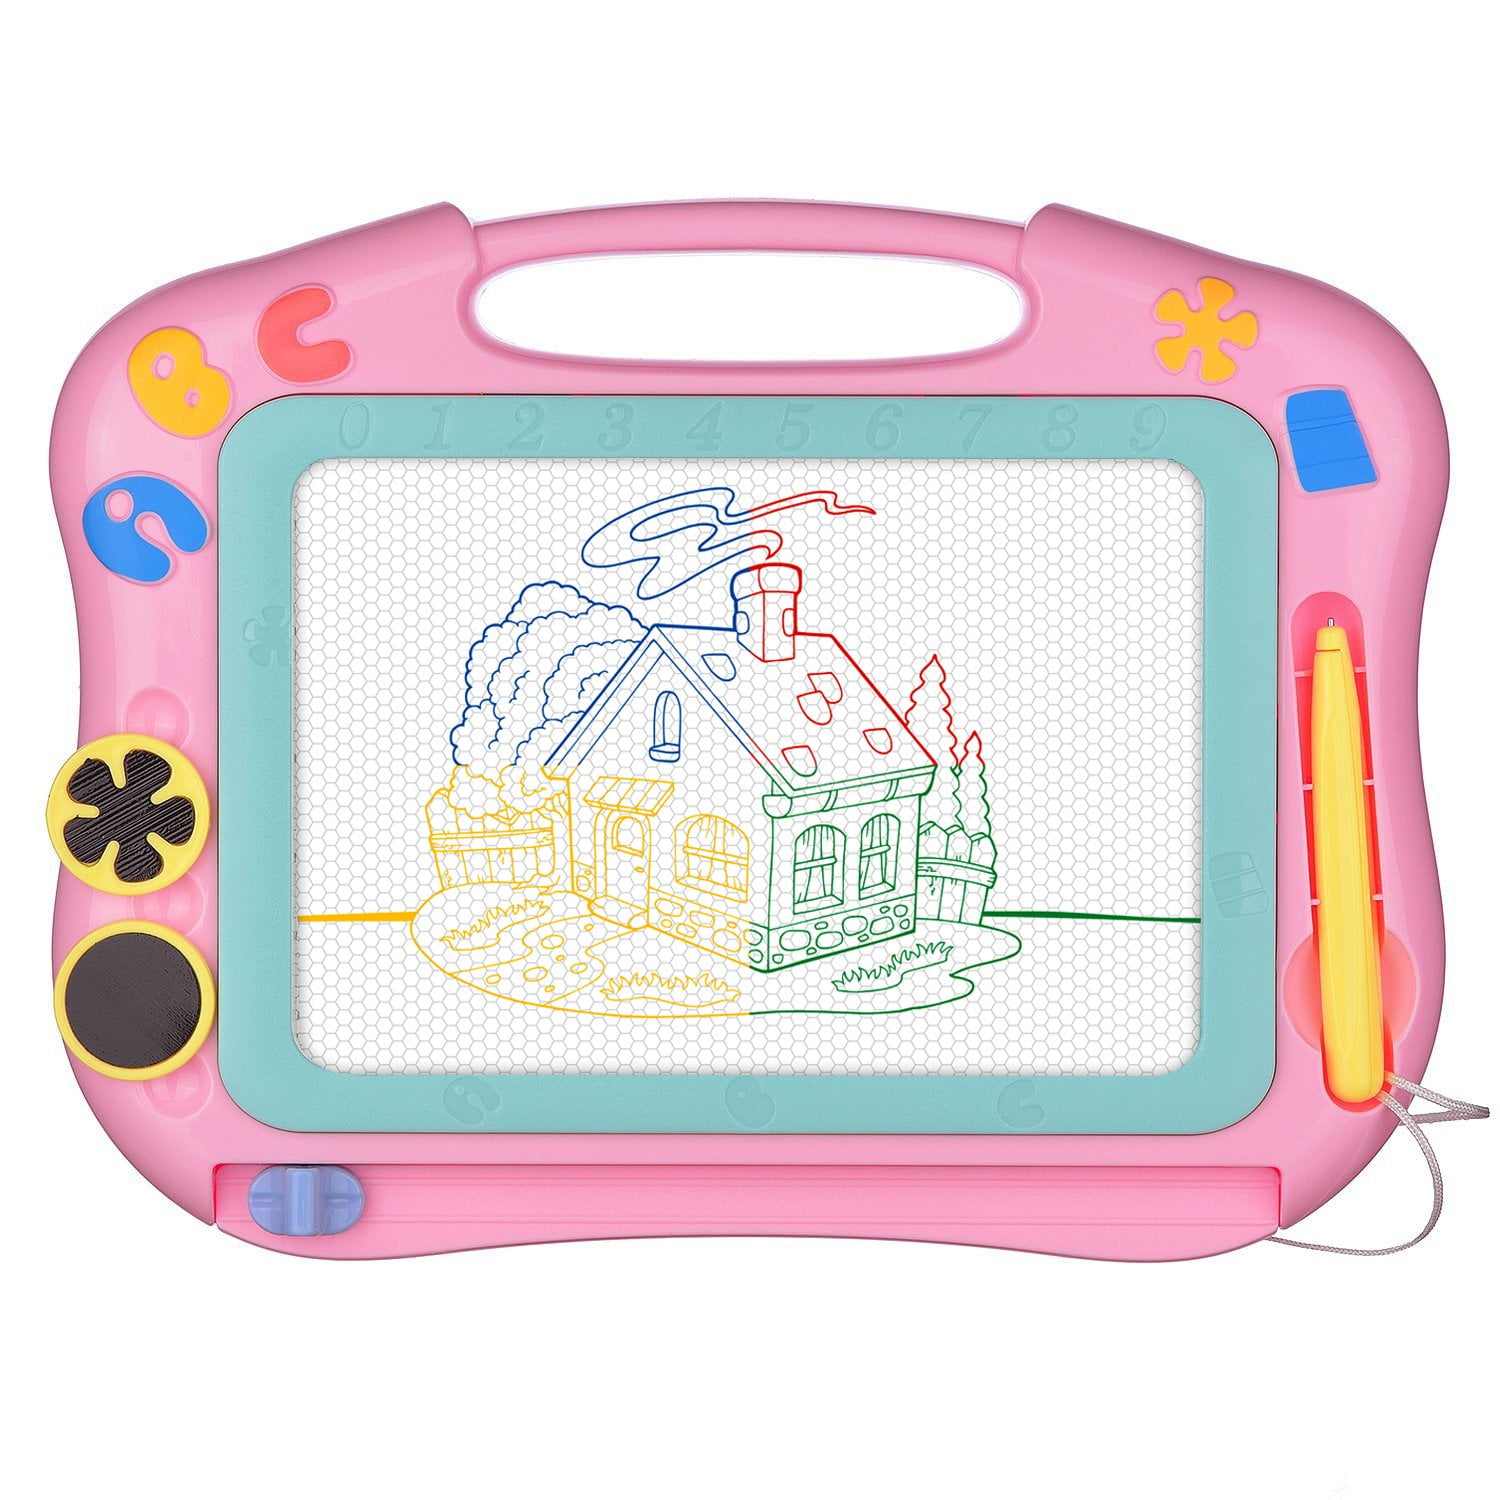 Size : 4634cm Xyanzi kids toys Magnetic Doodle Boards for Kids,Kids Magna Doodle Board Toy Childrens Magnetic Drawing Board Erasable Magnetic Drawing Board Colorful Sketch Pad 